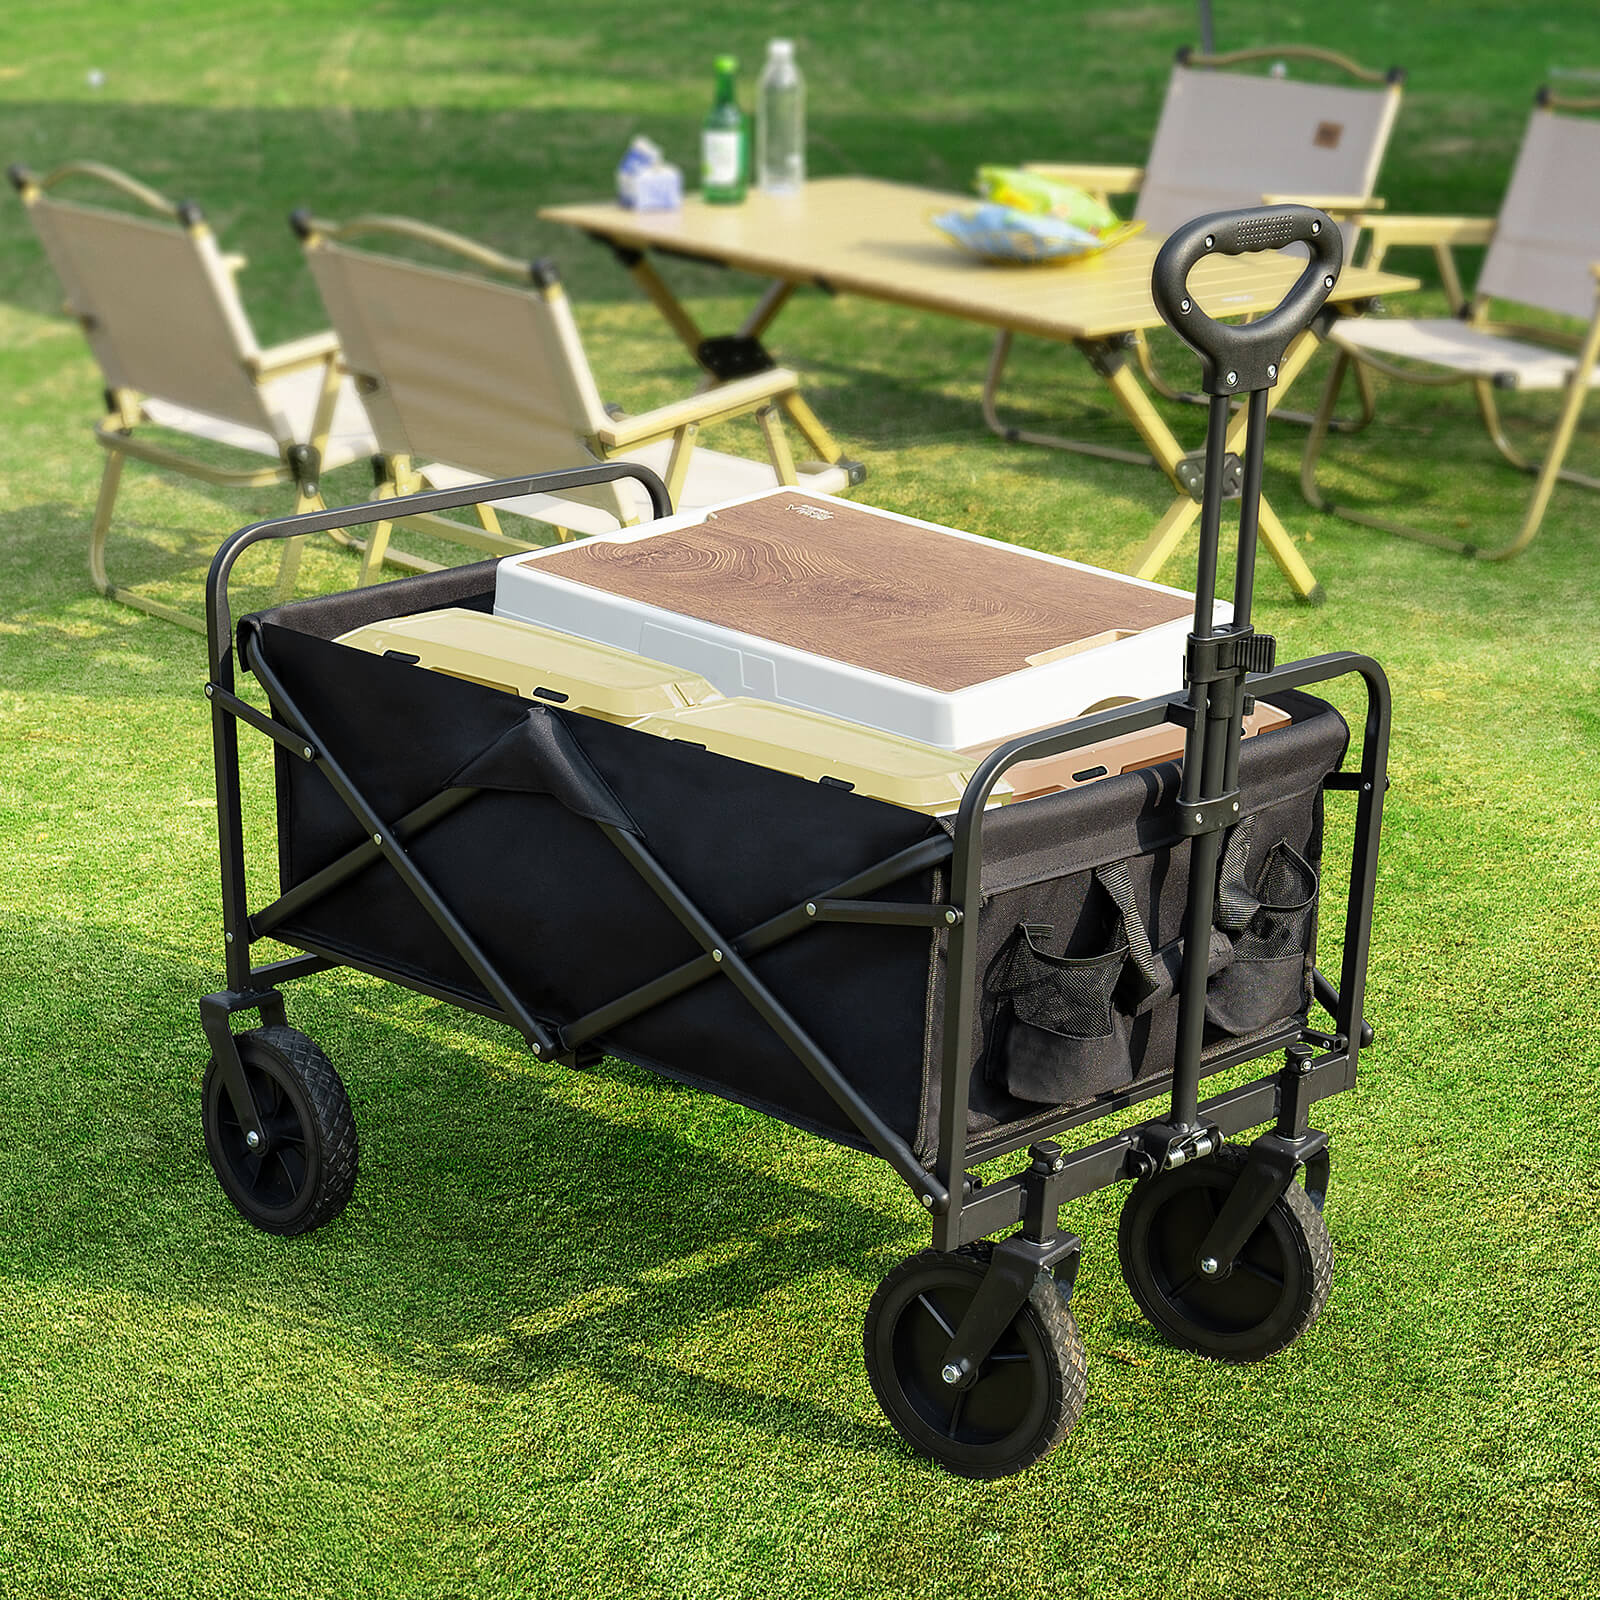 Wagons Carts Foldable with All-Terrain Wheels - foldable, extra large capacity, with drink holder, Suitable for Camping Sports Outdoor Activities